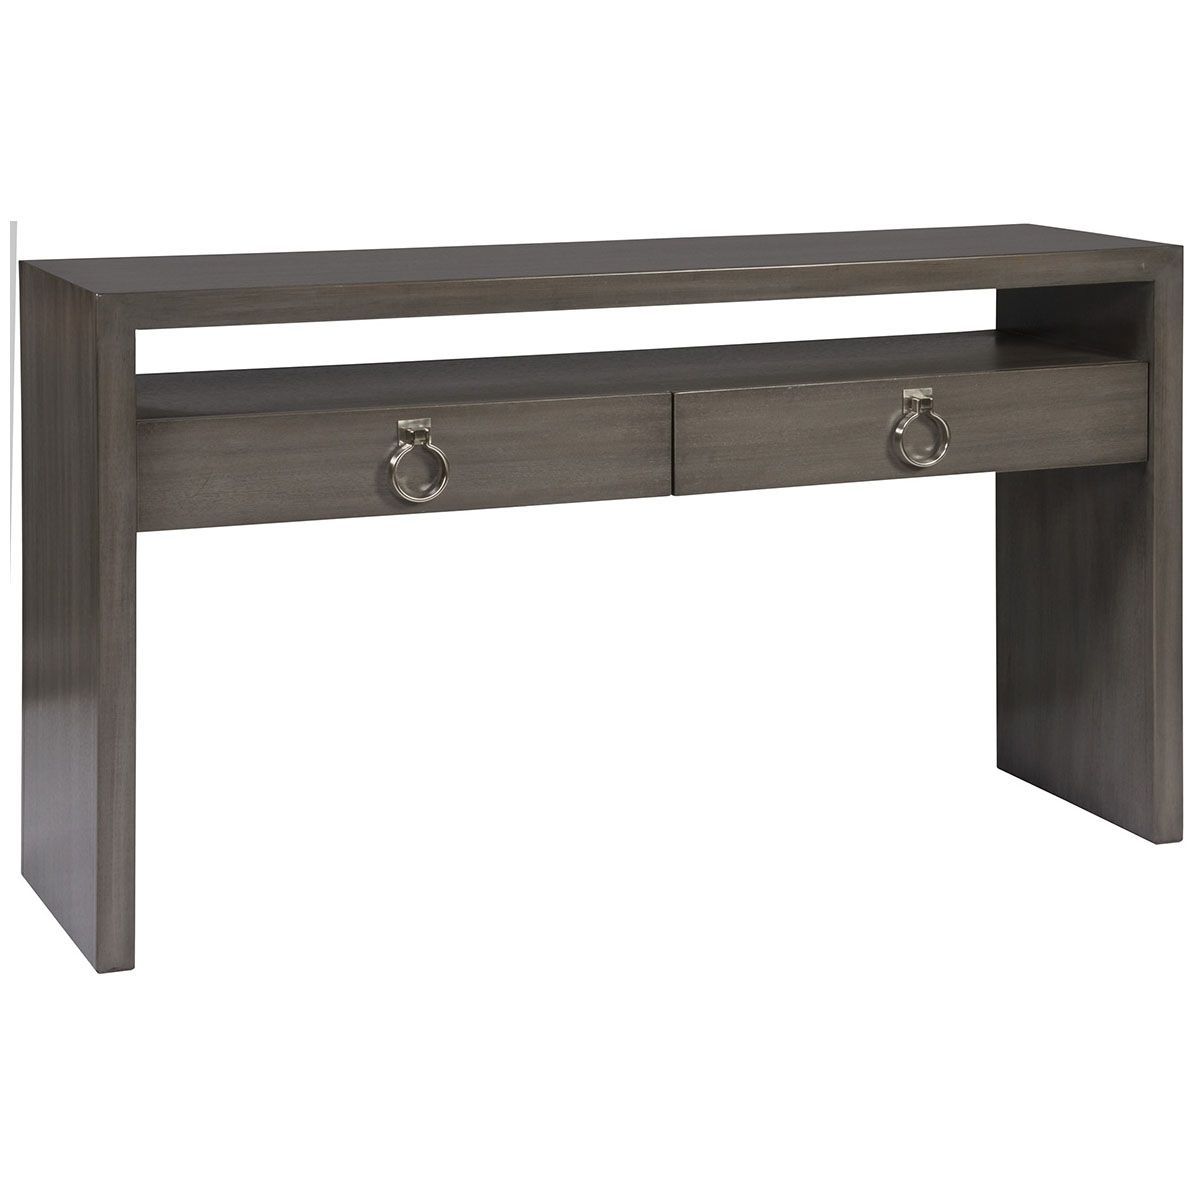 Vanguard Furniture Margo Console W349s Lg | Vanguad Furniture Within Parsons White Marble Top &amp; Dark Steel Base 48x16 Console Tables (View 16 of 30)